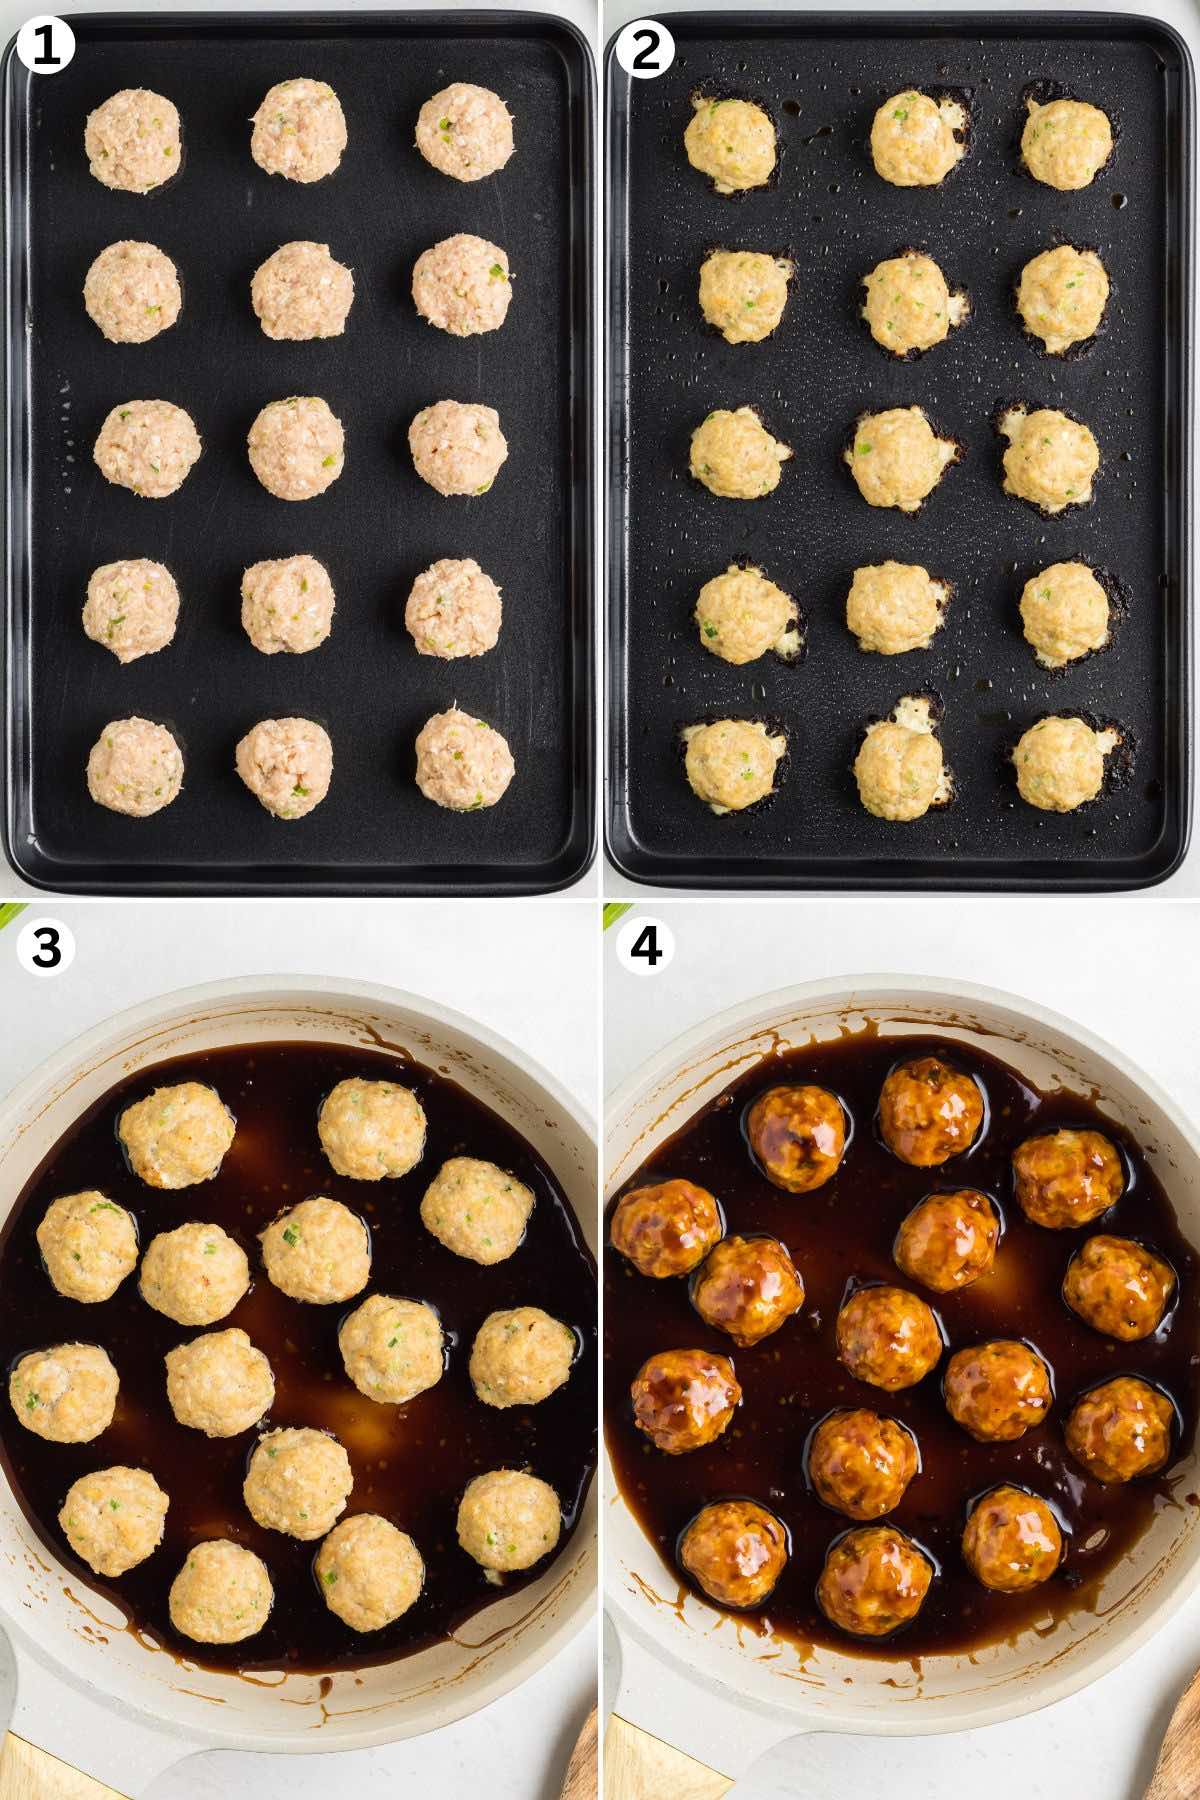 Form the chicken mixture into meatballs. Bake. Prepare the sauce and add the baked meatballs. Toss the meatballs until fully covered.